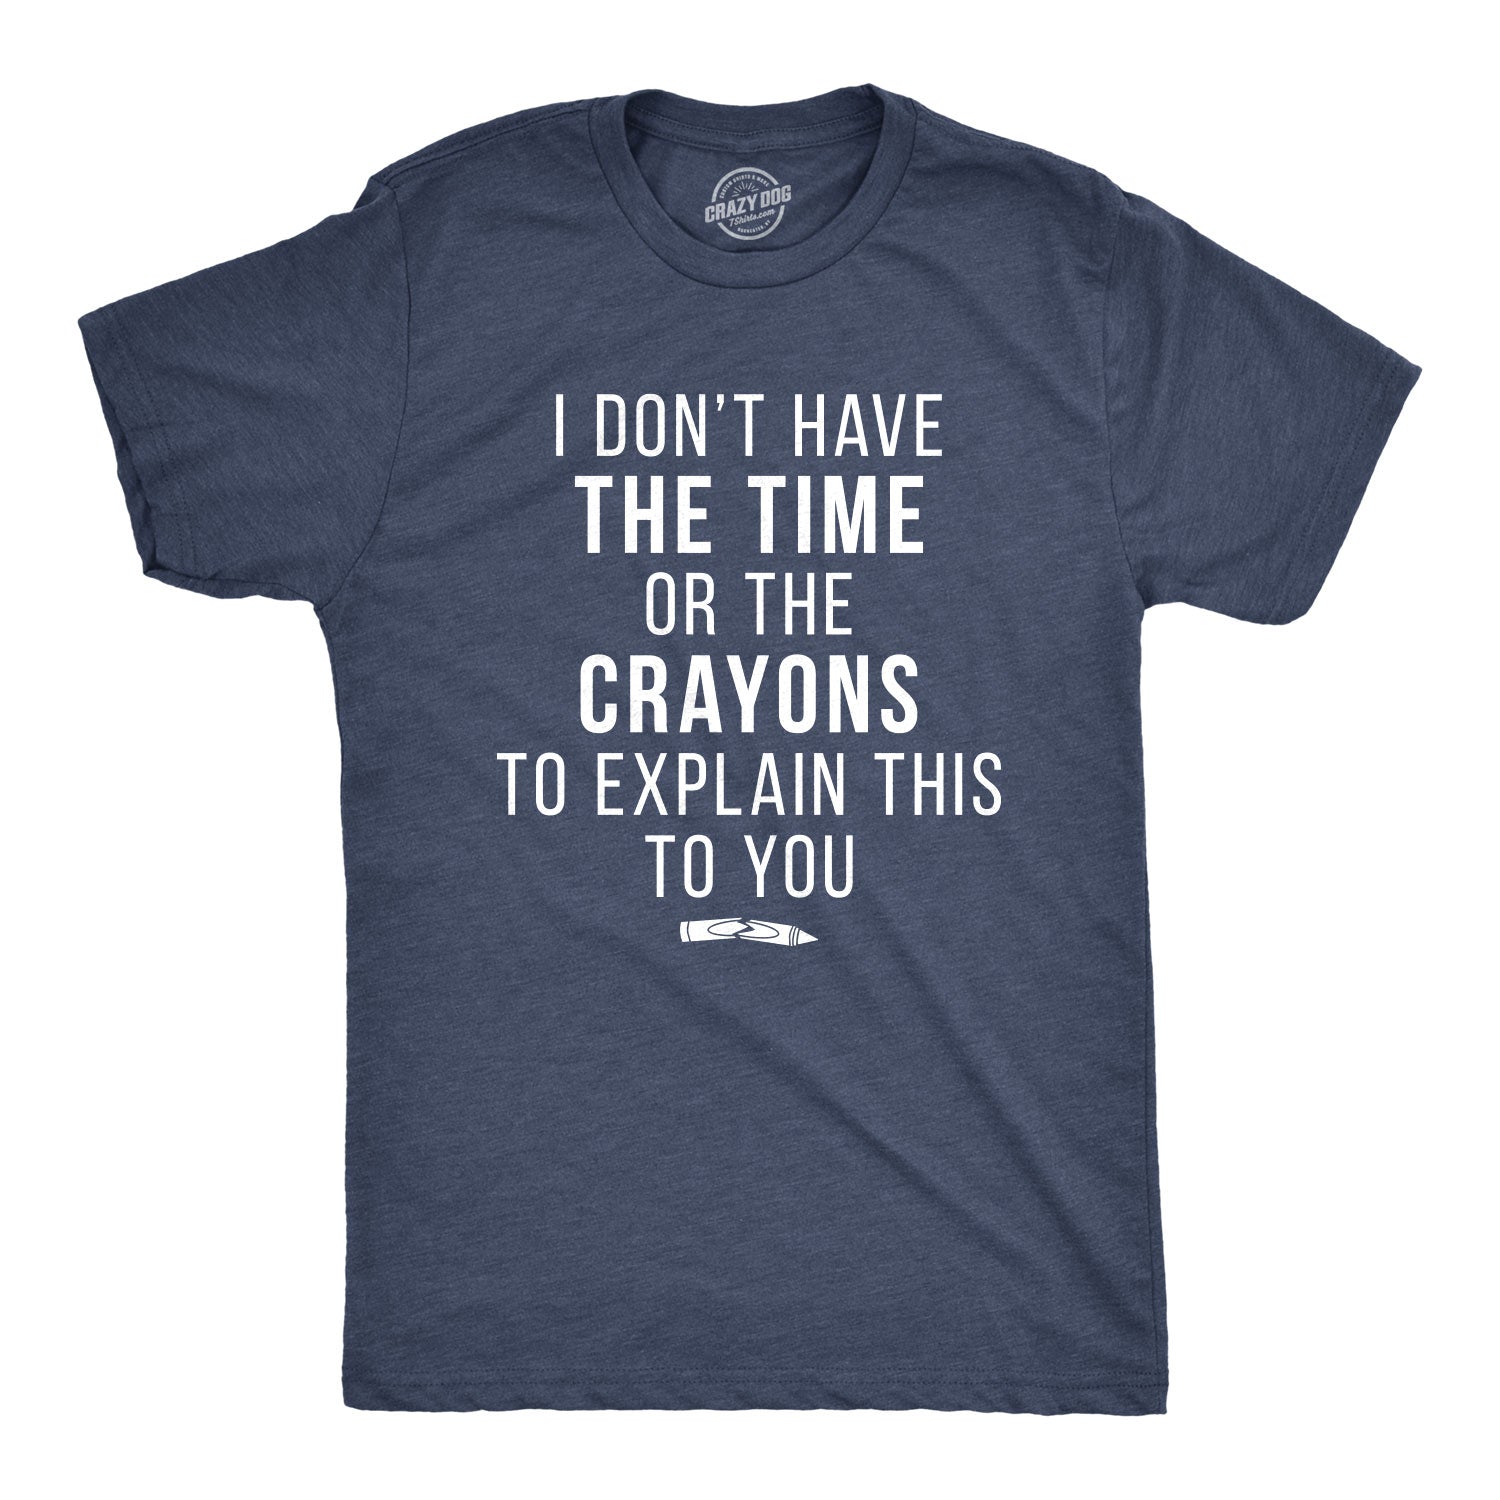 Funny Heather Navy I Don't Have The Time Or The Crayons Mens T Shirt Nerdy Sarcastic Tee